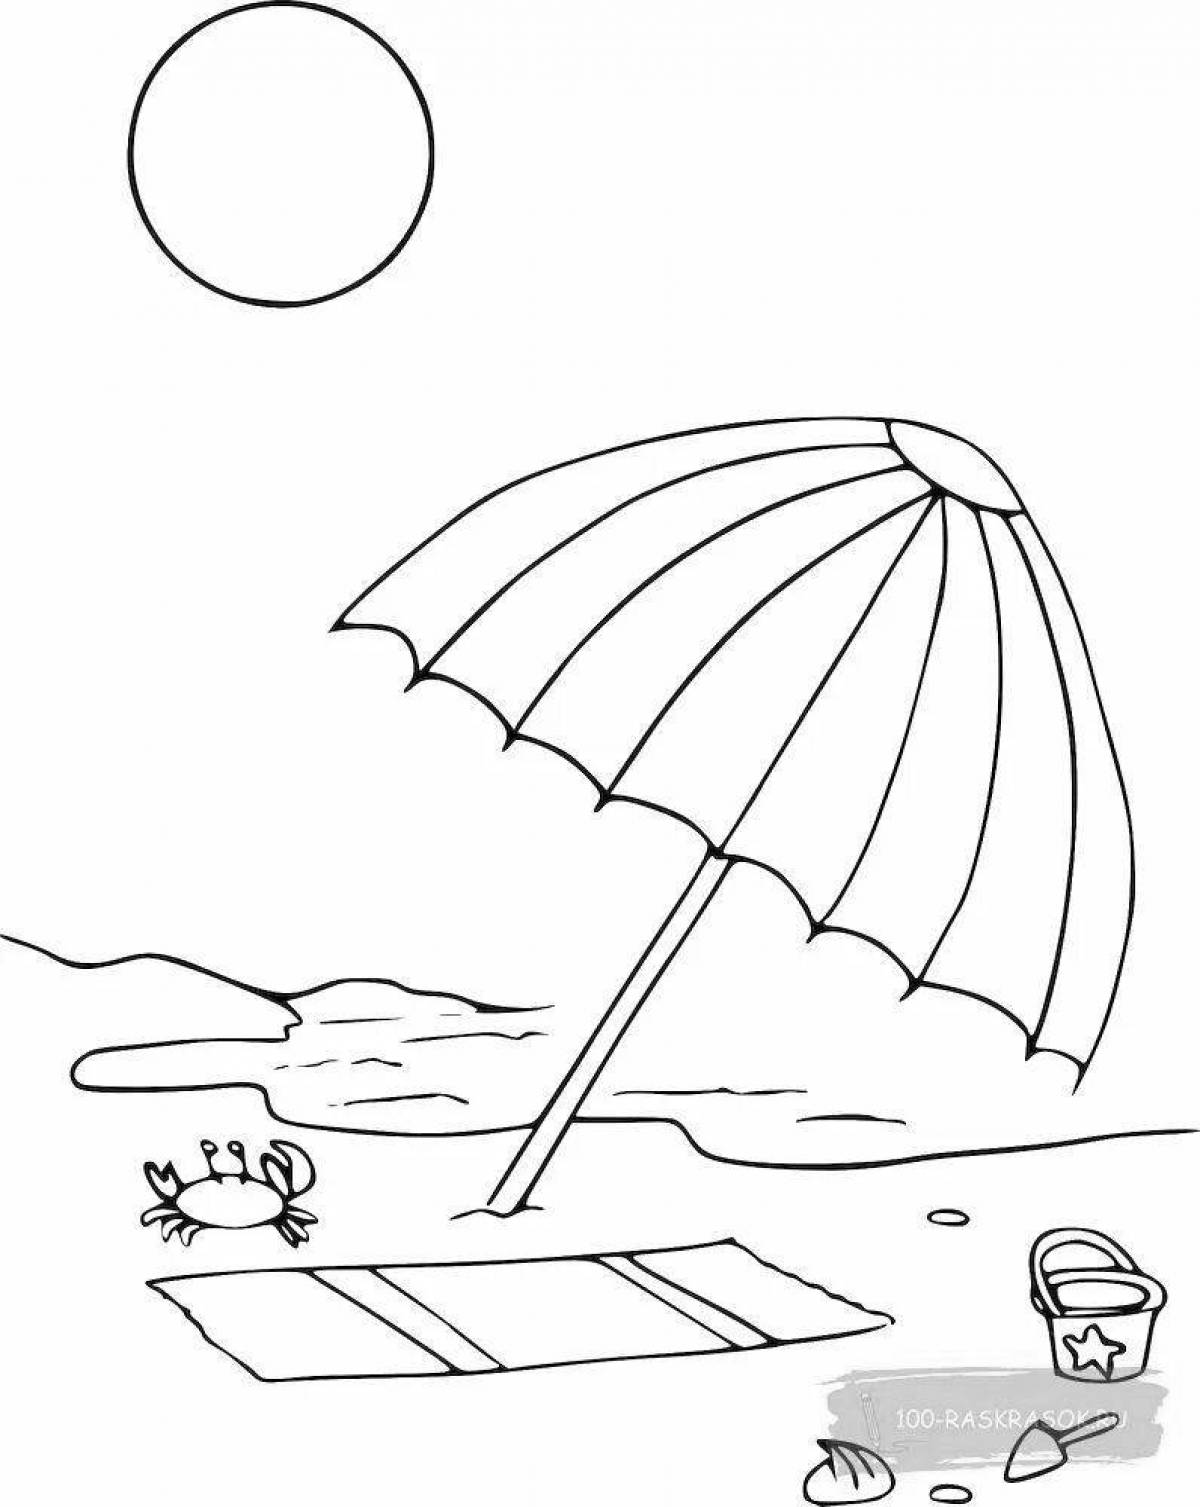 Playful beach and sea coloring book